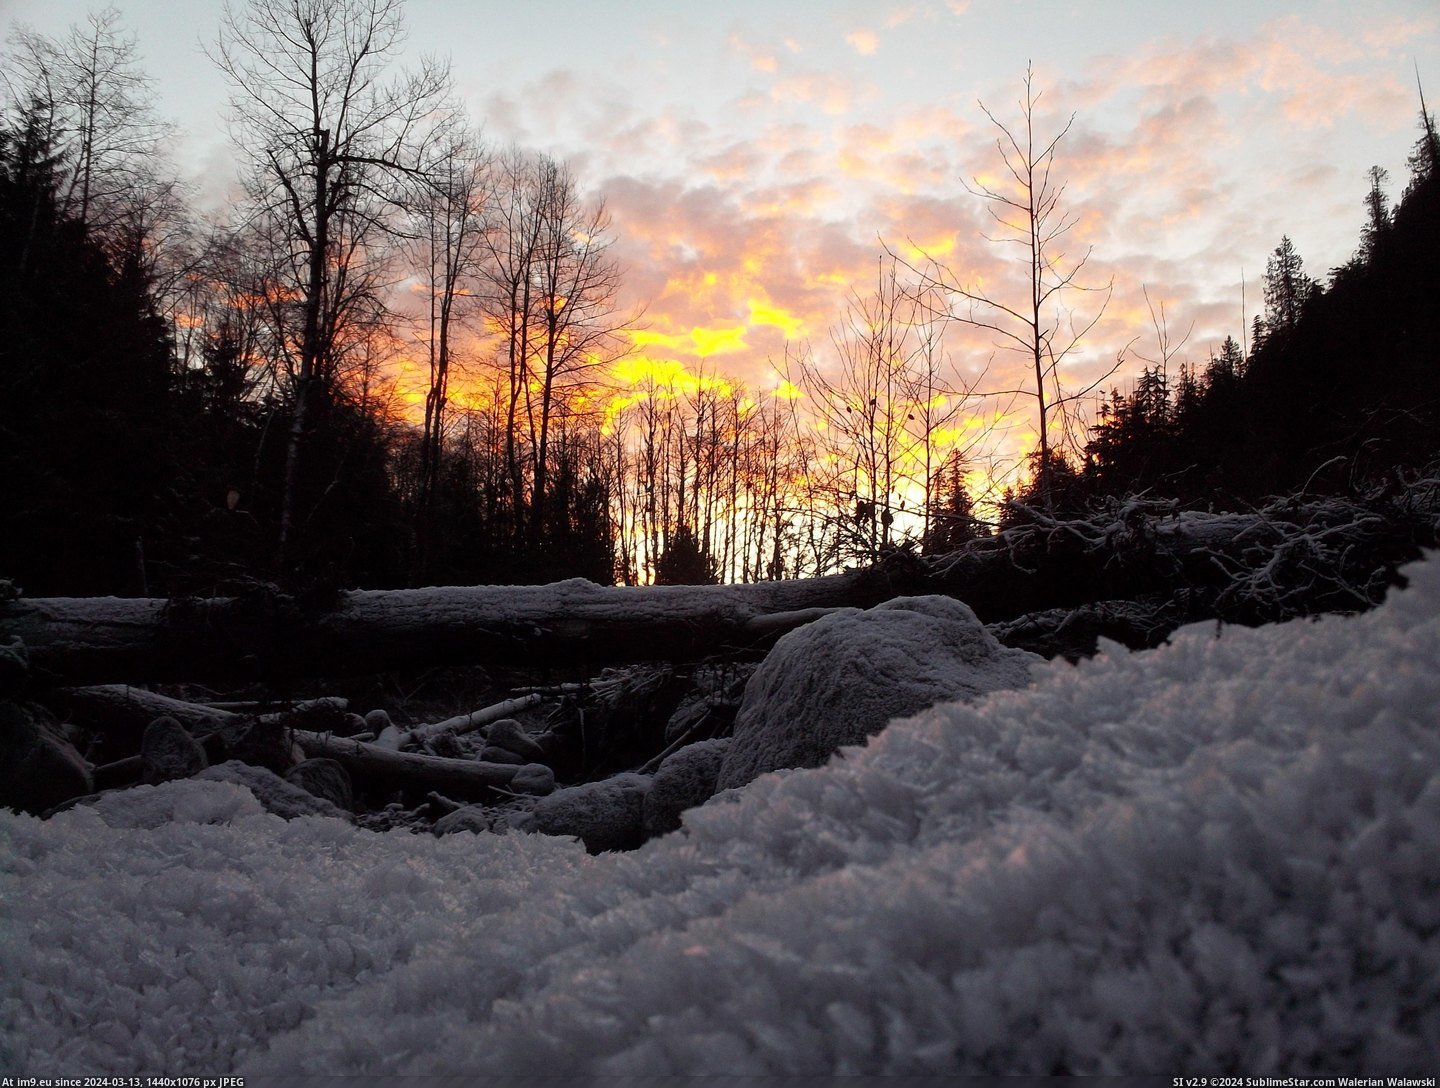 #State #River #Ice #Fork #Nooksack #Fire #Sunrise #4000x3000 [Earthporn] Fire and Ice. Sunrise near the Middle Fork of the Nooksack River-WA state. [OC](4000x3000) Pic. (Image of album My r/EARTHPORN favs))